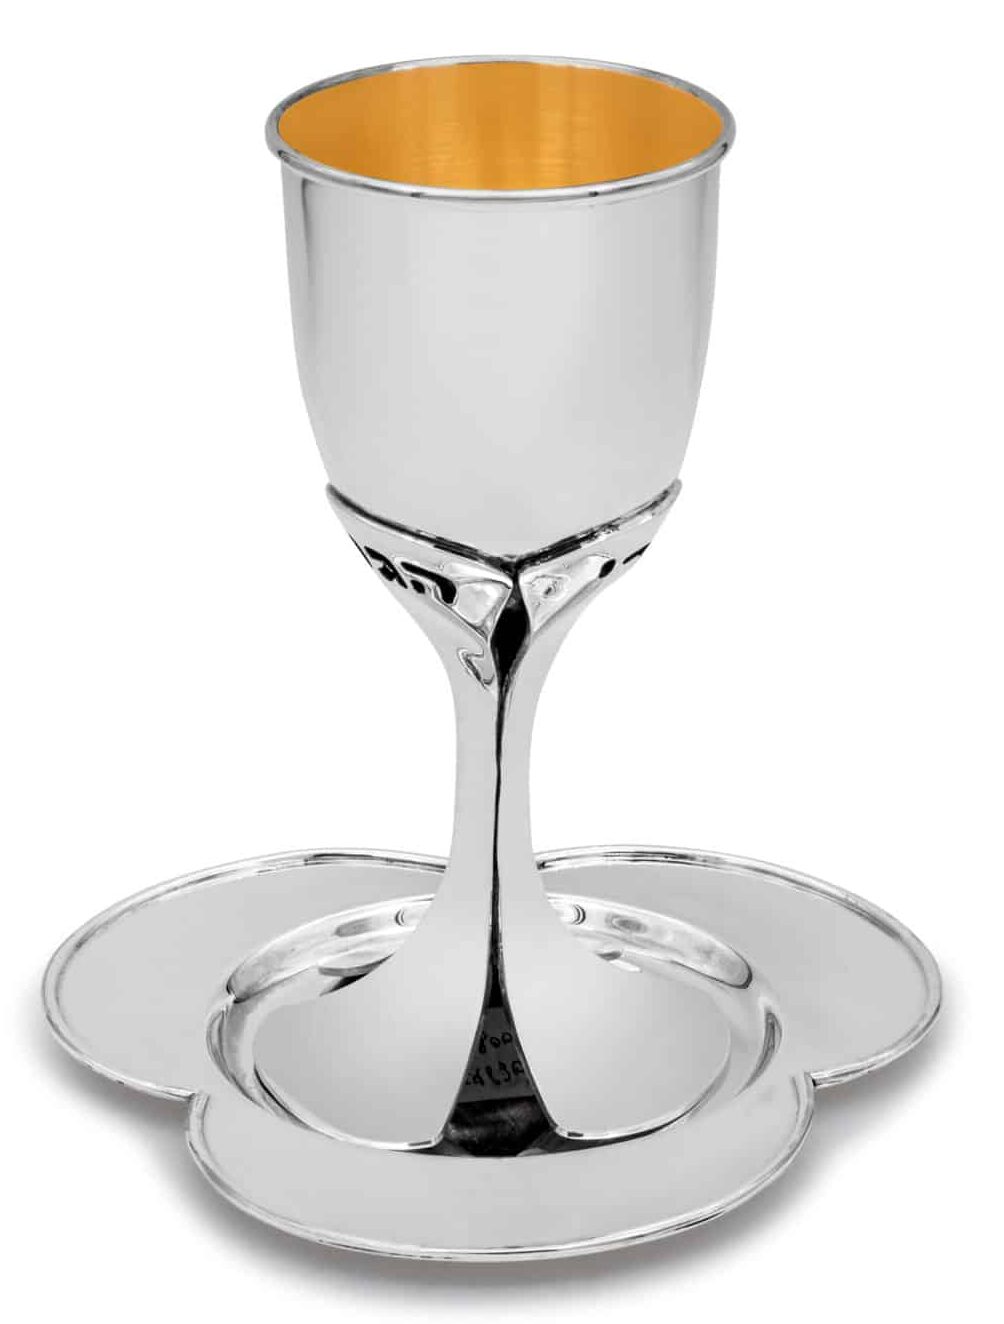 Special Floral Kiddush Cup With Hebrew Shabbat blessing